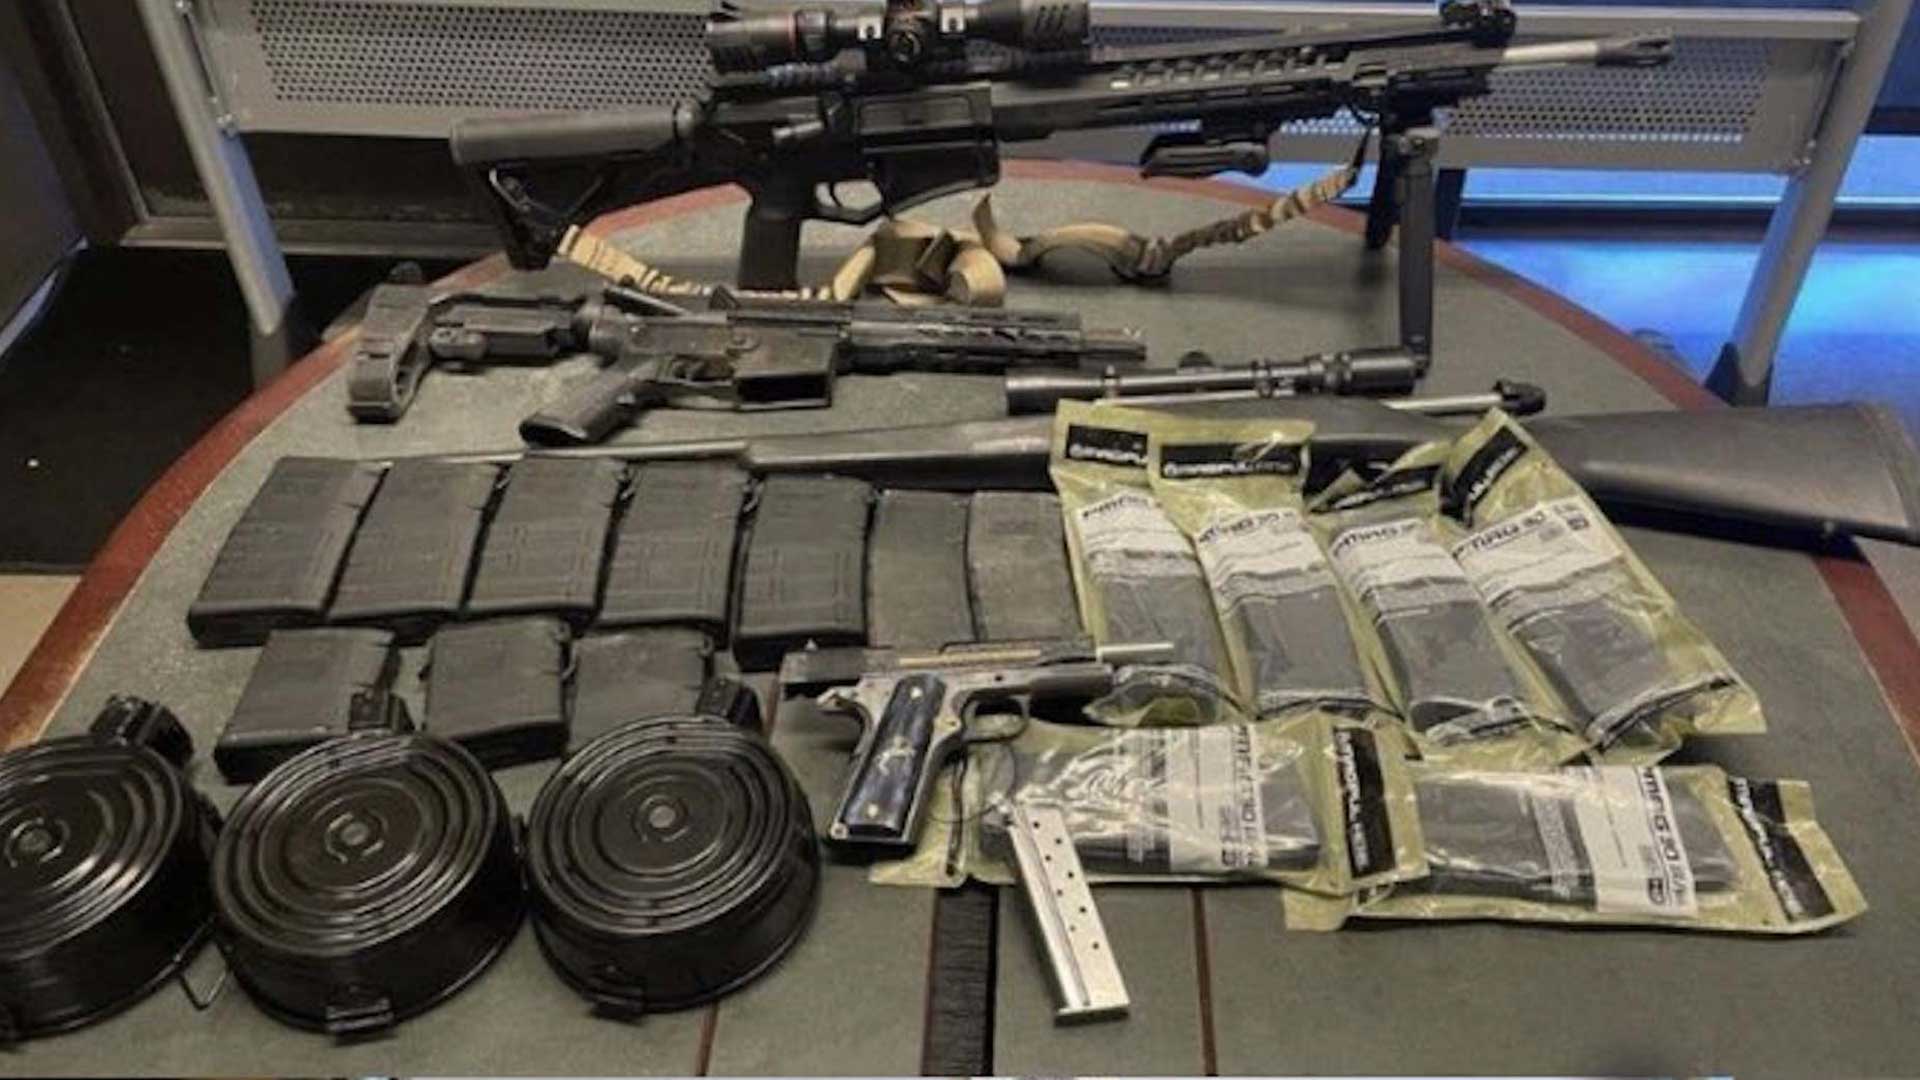 Weapons and money seized by CBP officers.